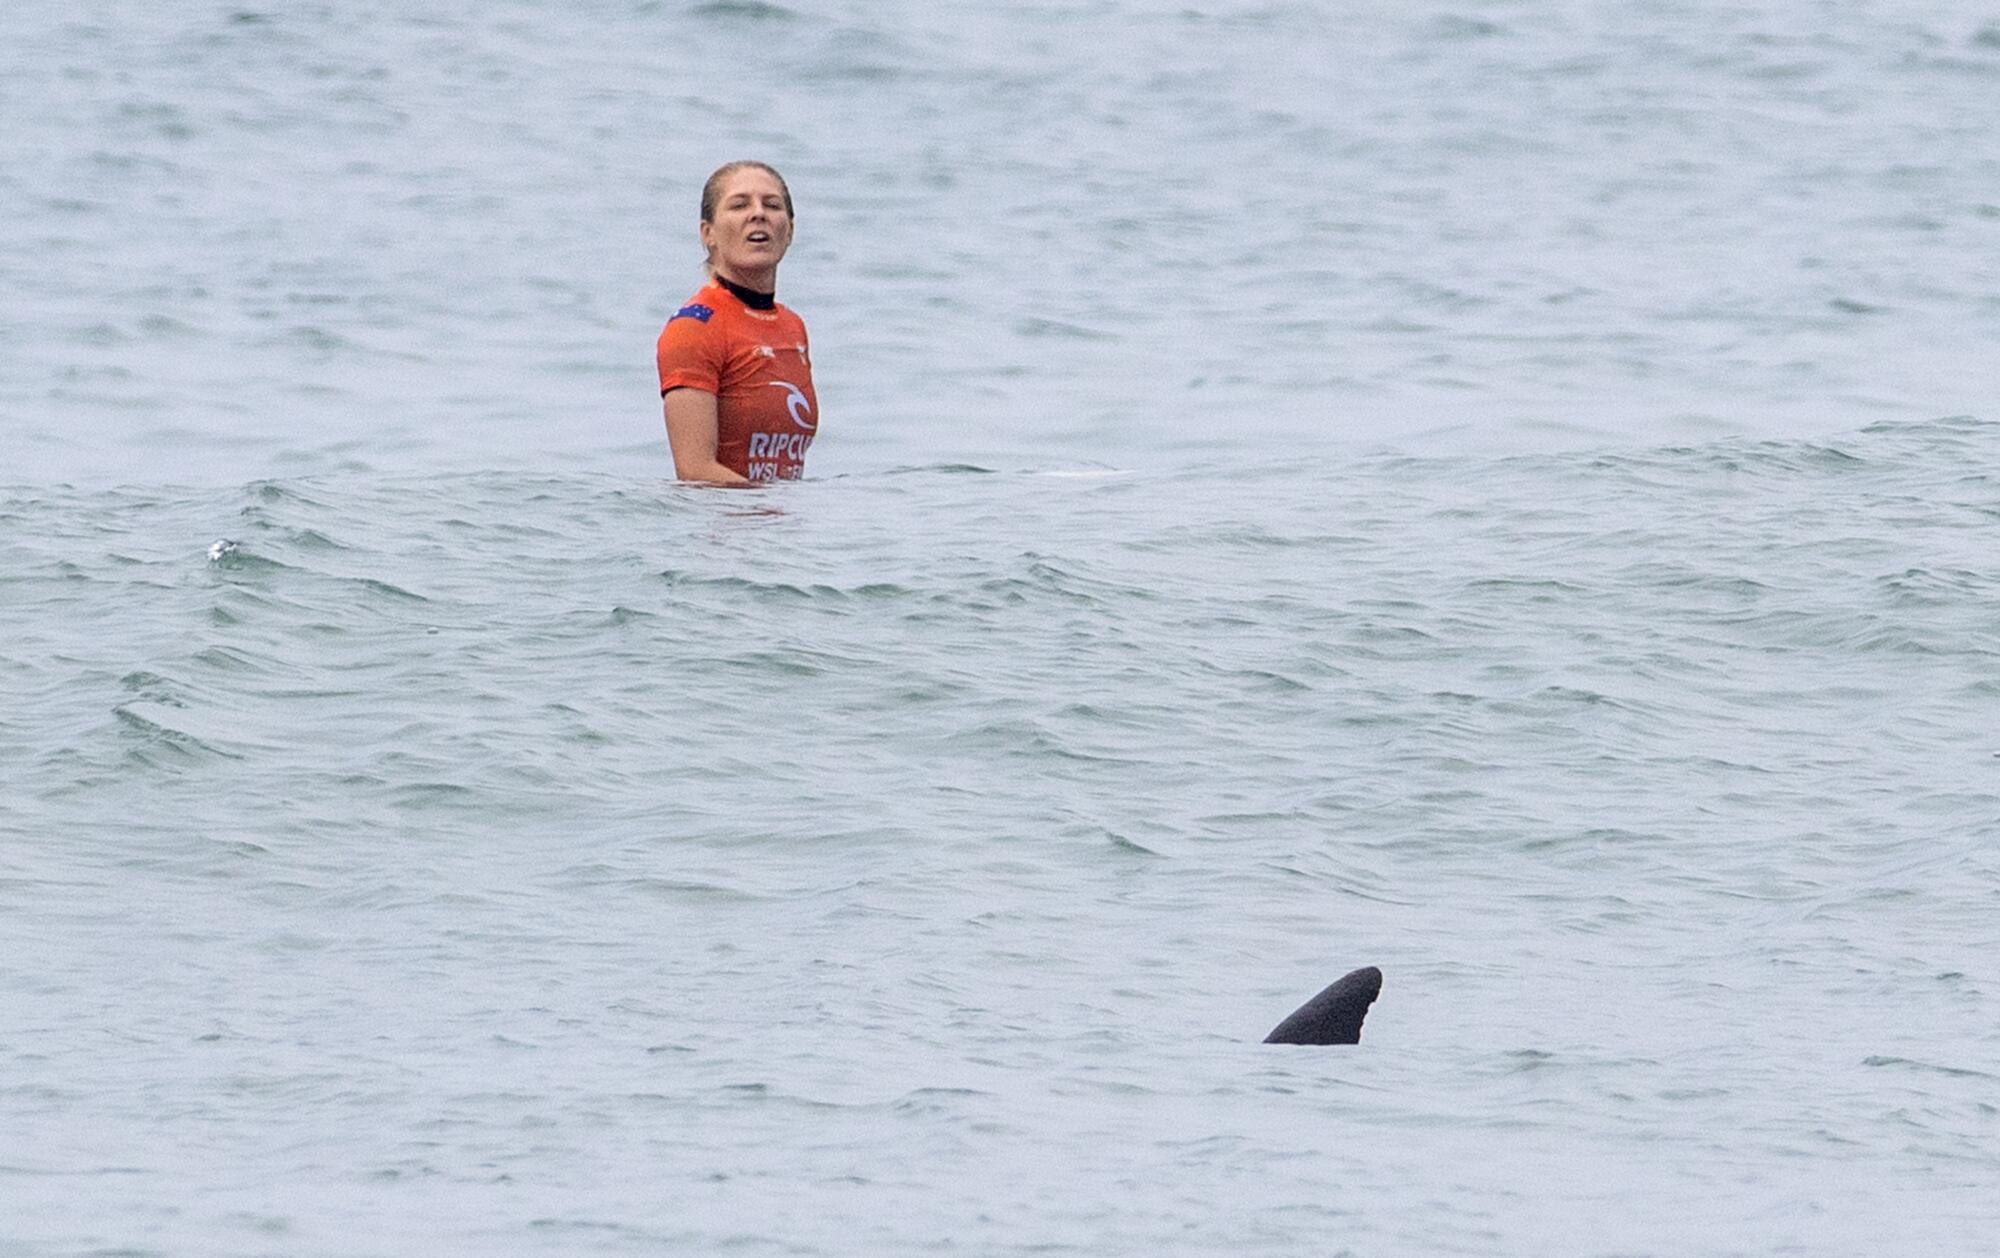 Stephanie Gilmore looks curiously at the fin of a dolphin swimming near her during a match at the WSL Finals.